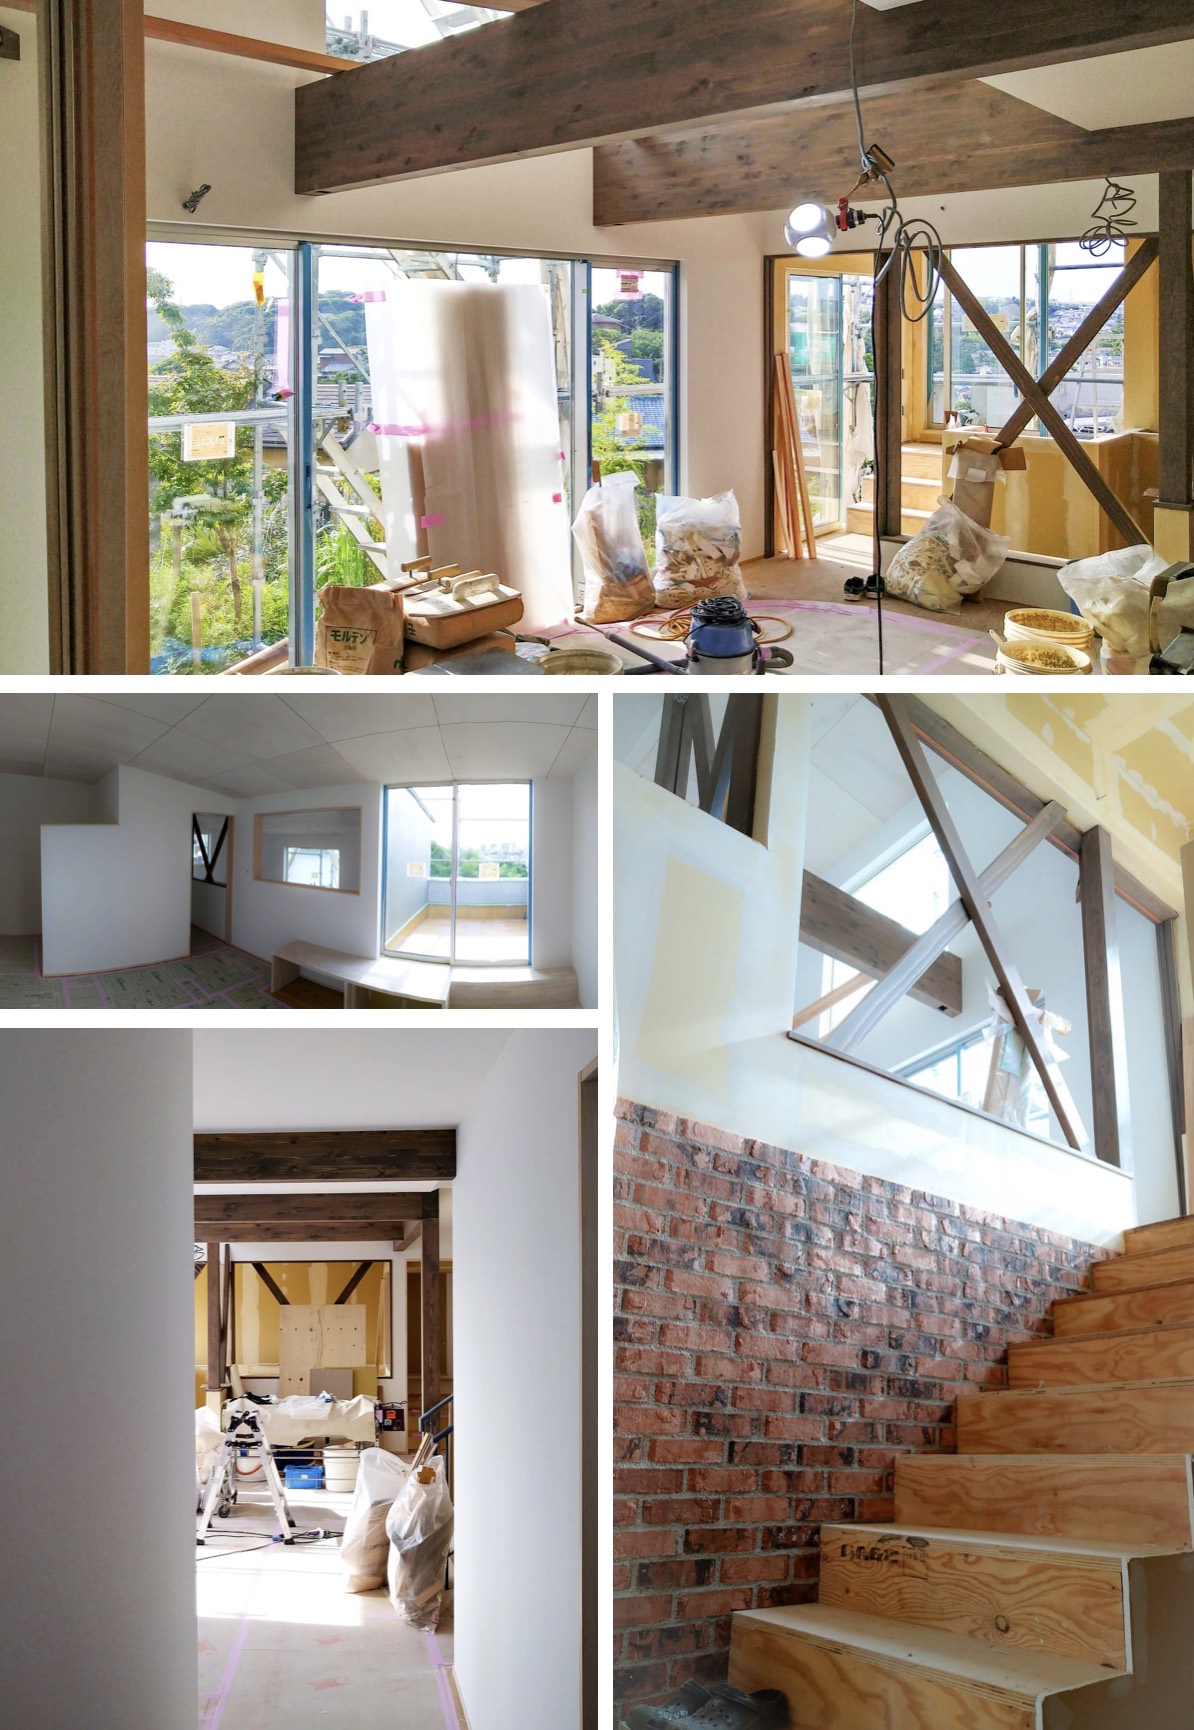 K Residence is currently under construction in Koshigoe, Kamakura City, and is a house where you can admire Mt. Fuji. This is a house with a skip floor and a half-basement approach, with a span that is the limit of conventional wooden construction.